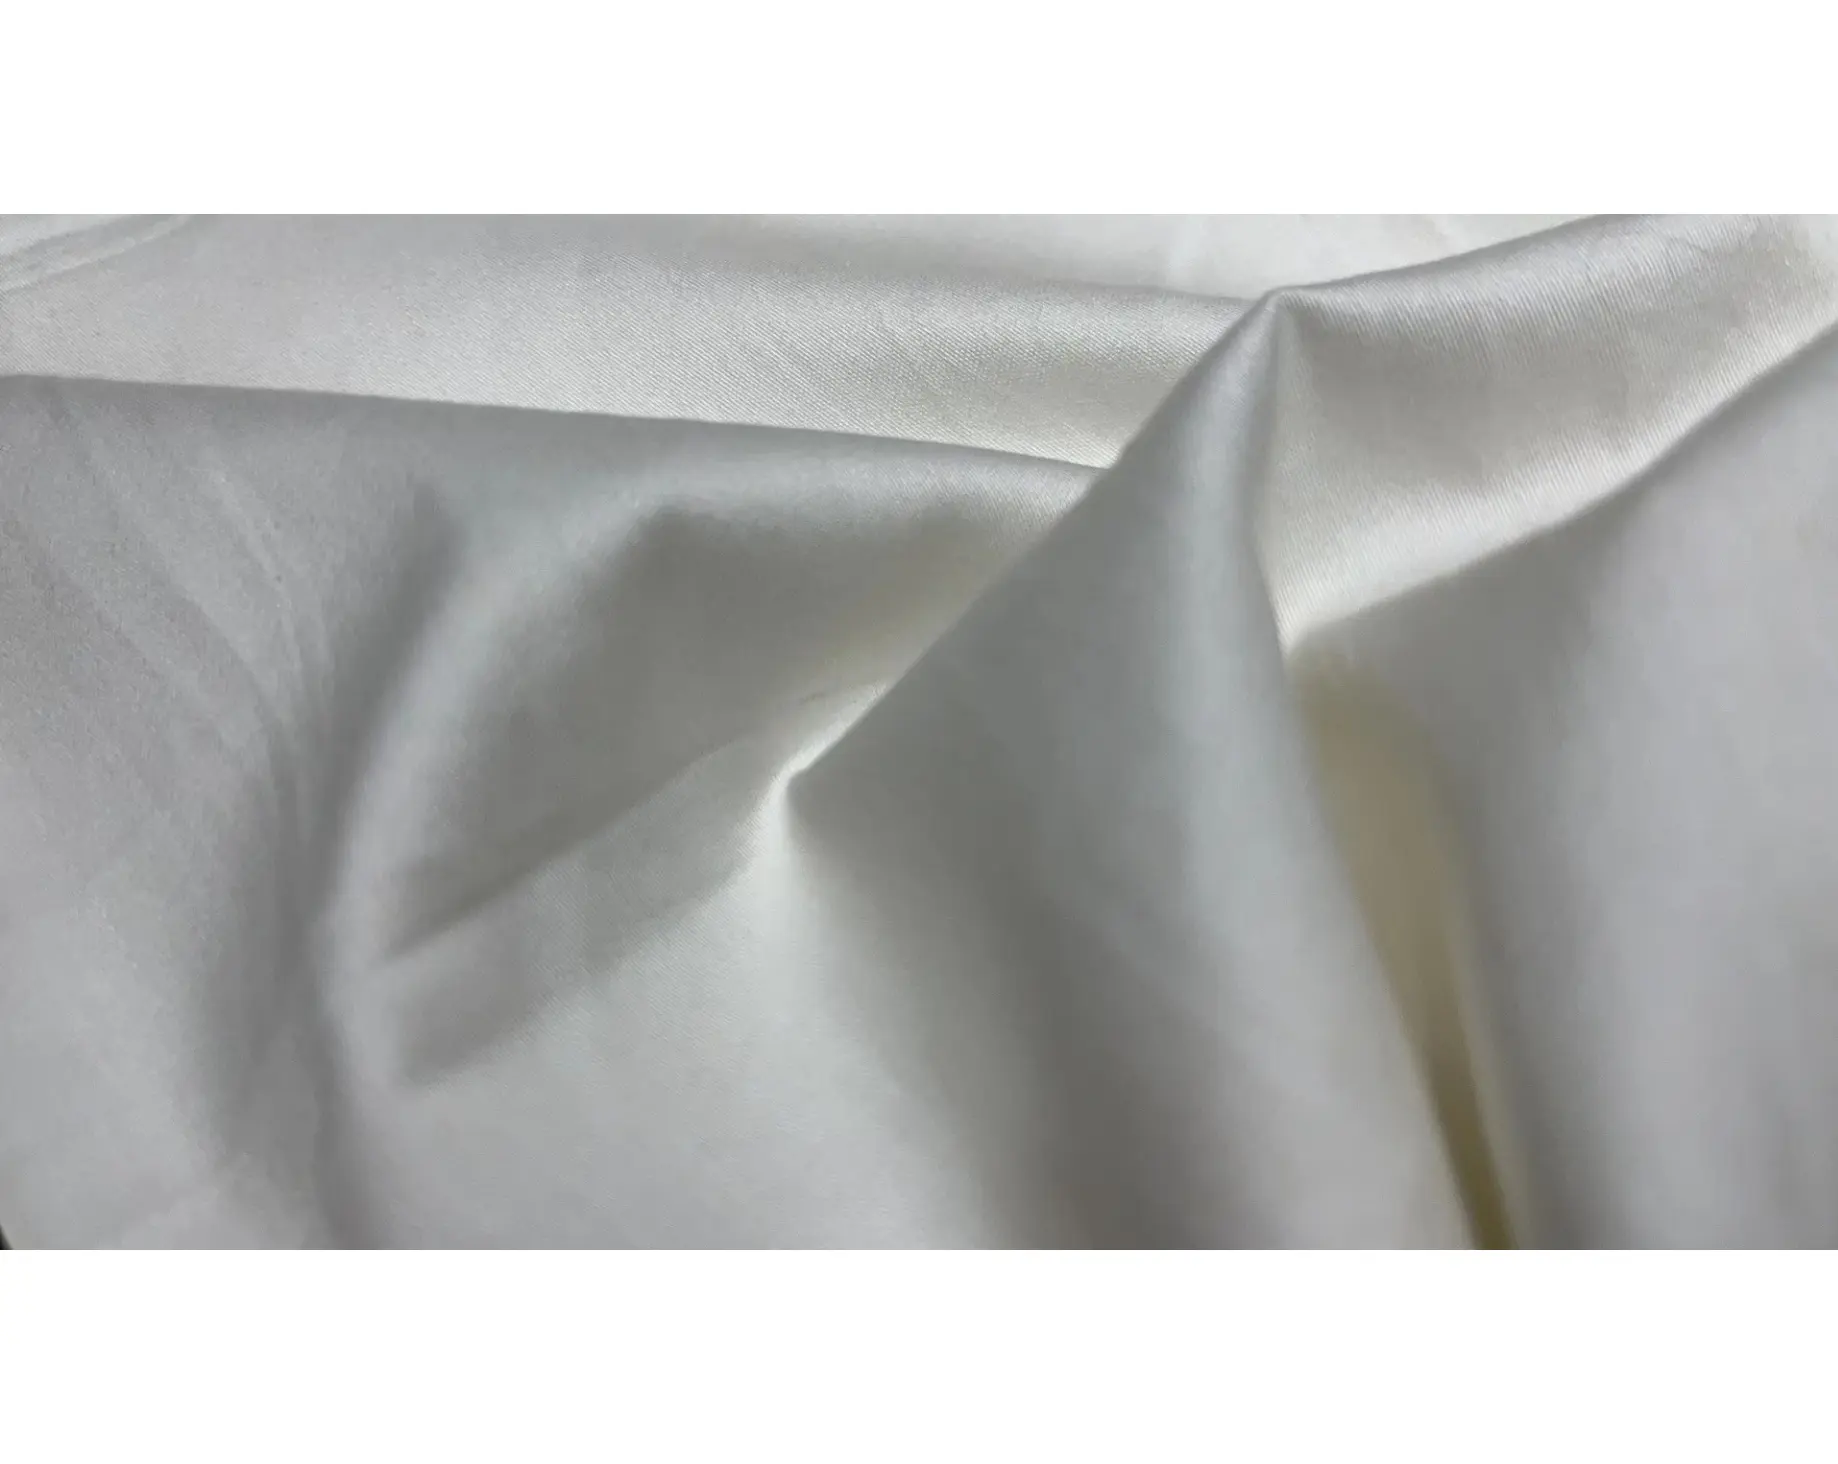 100%cotton sateen 80*80 plain 1/1 percale Sateen Fabric 100% Cotton Fabric for shirt and Upholstery Textile